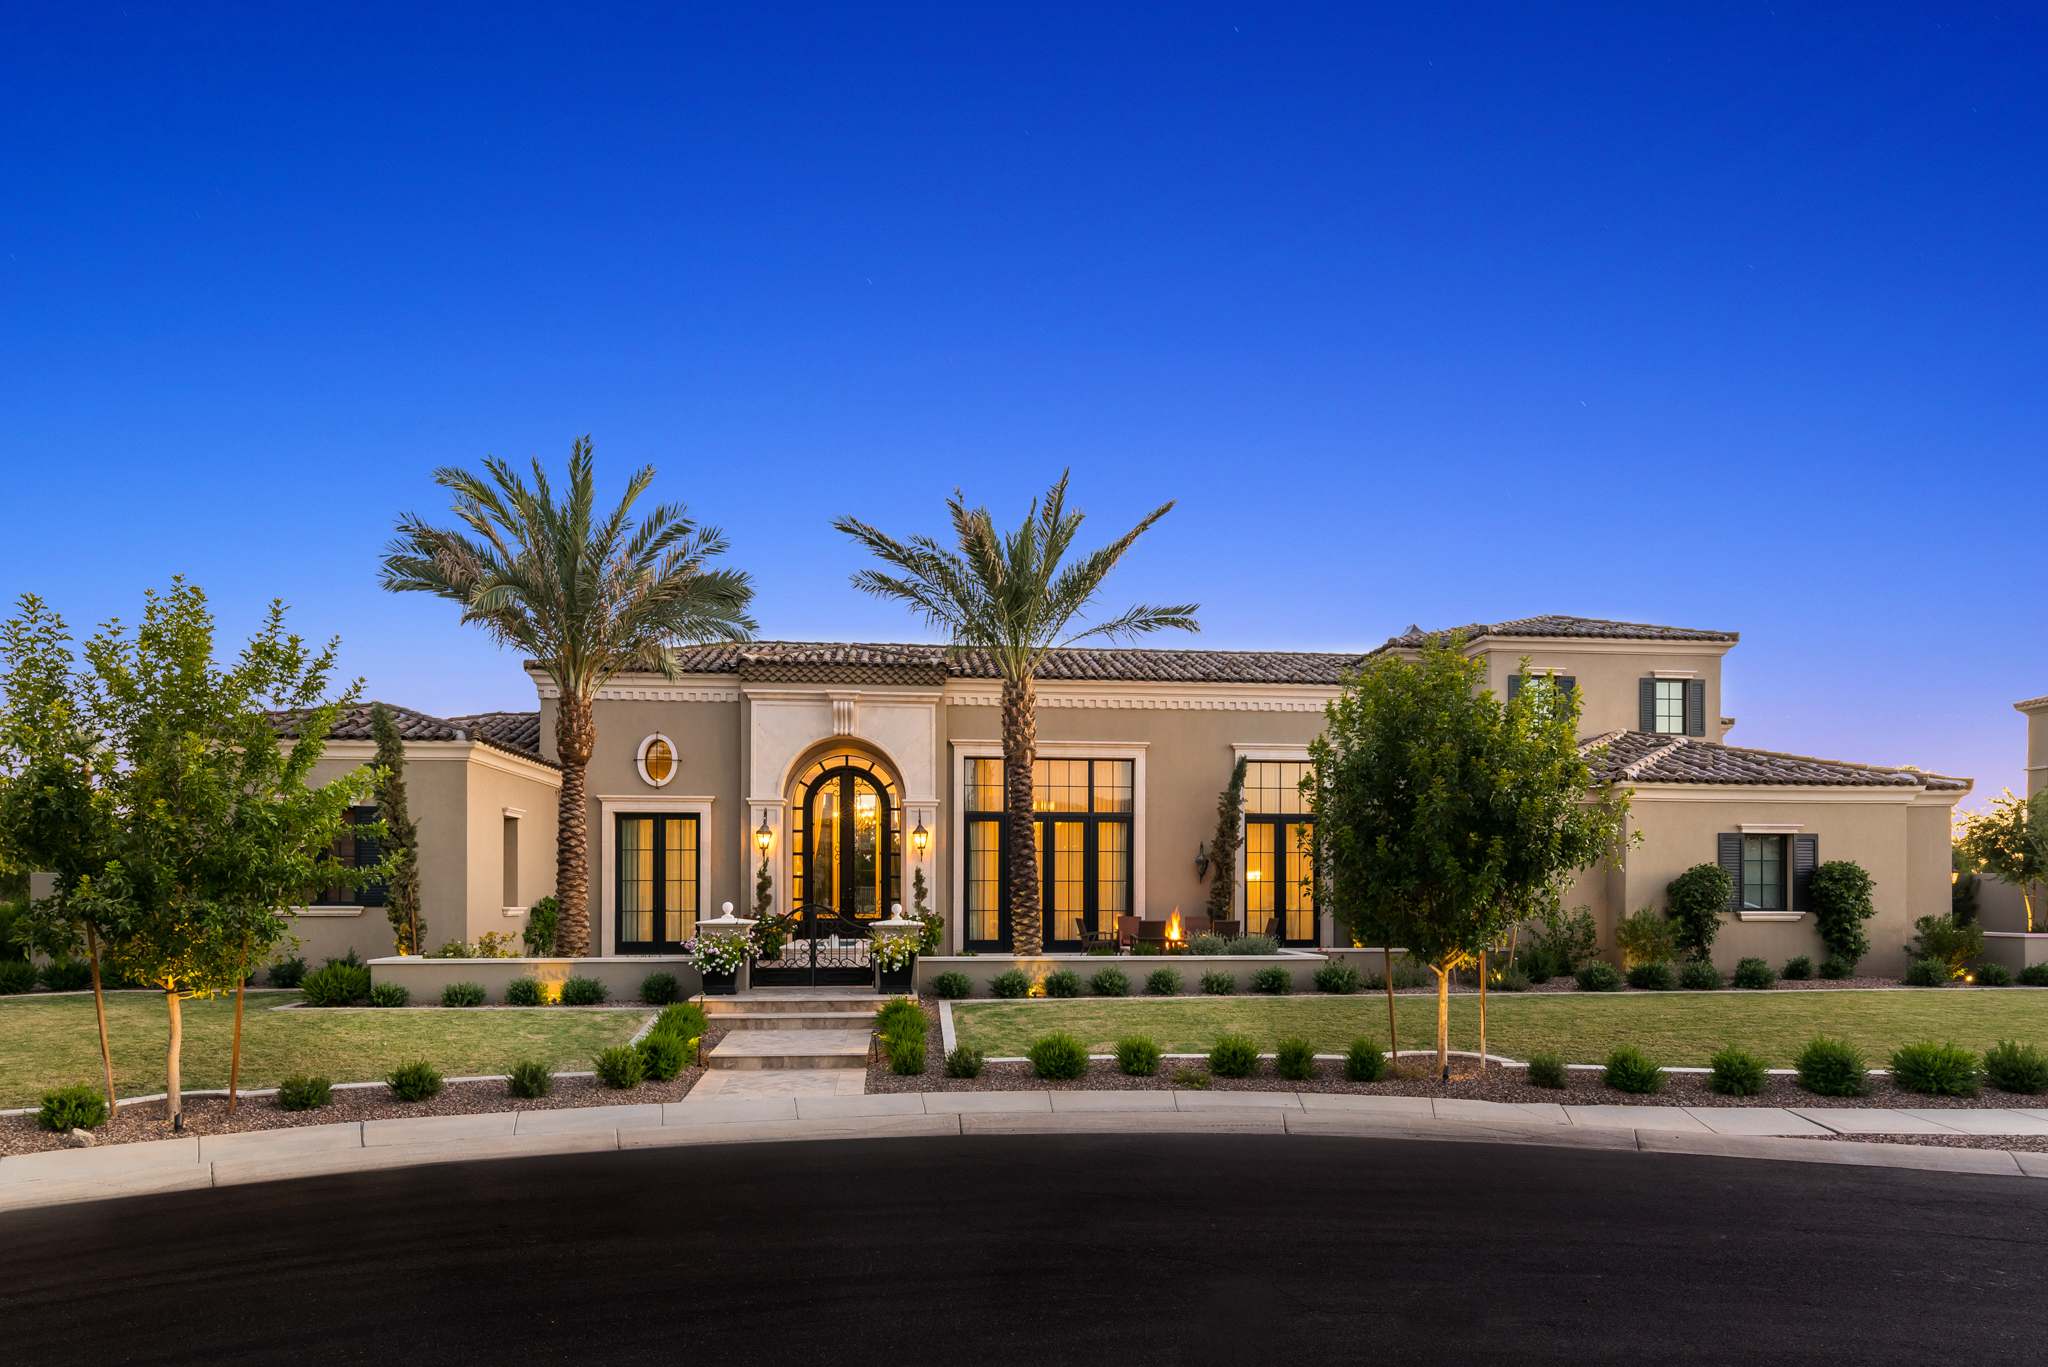 A large, modern luxury home with a landscaped front yard, palm trees, and pathway lighting at dusk.